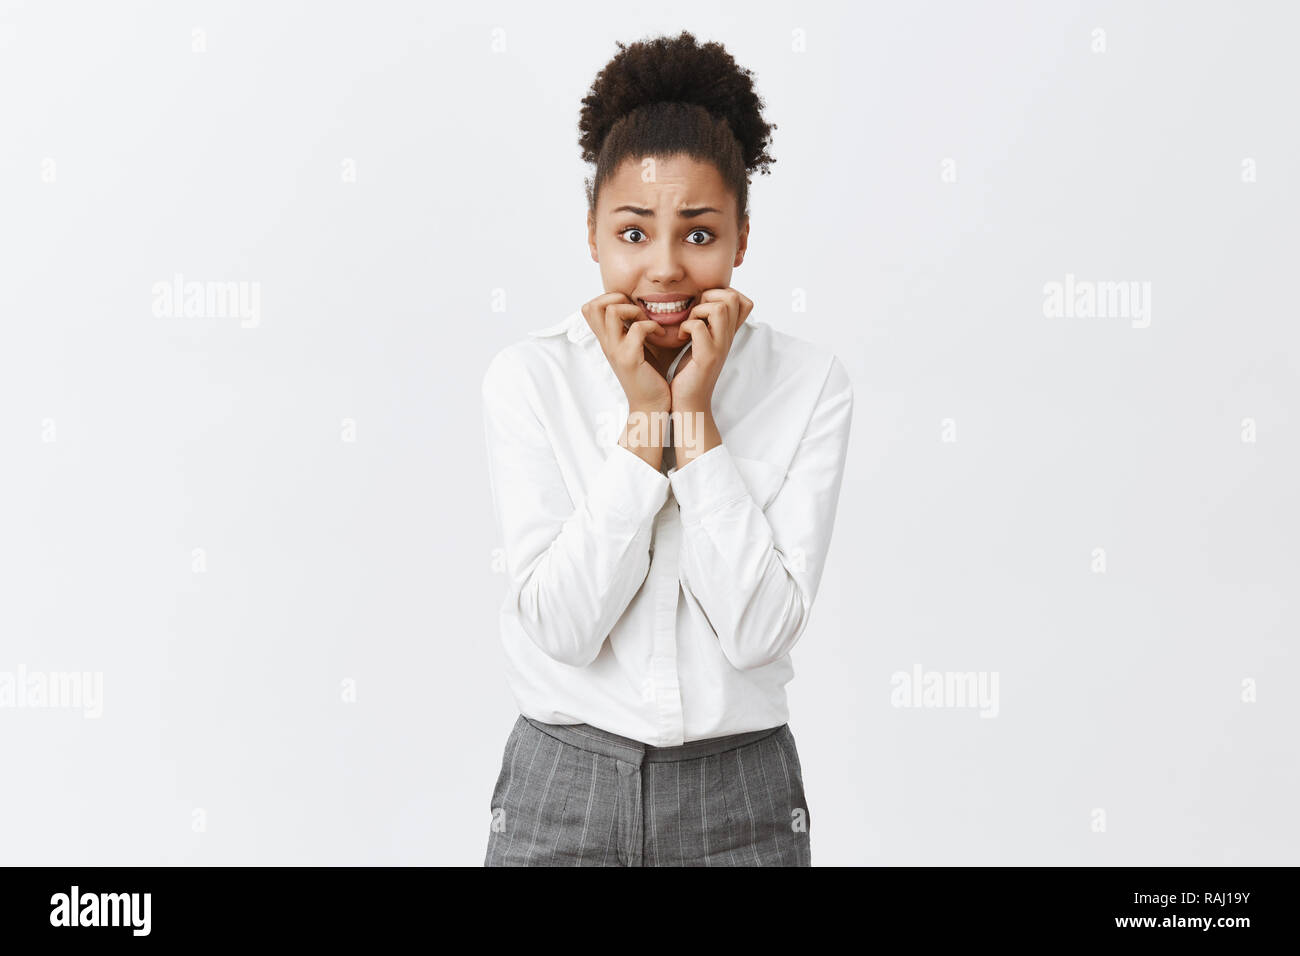 Girl stuck in elevator being scared to death, standing over gray background, biting fingernails from fear and anxiety, staring intensely at camera, waiting for rescue, wearing office pants and shirt Stock Photo